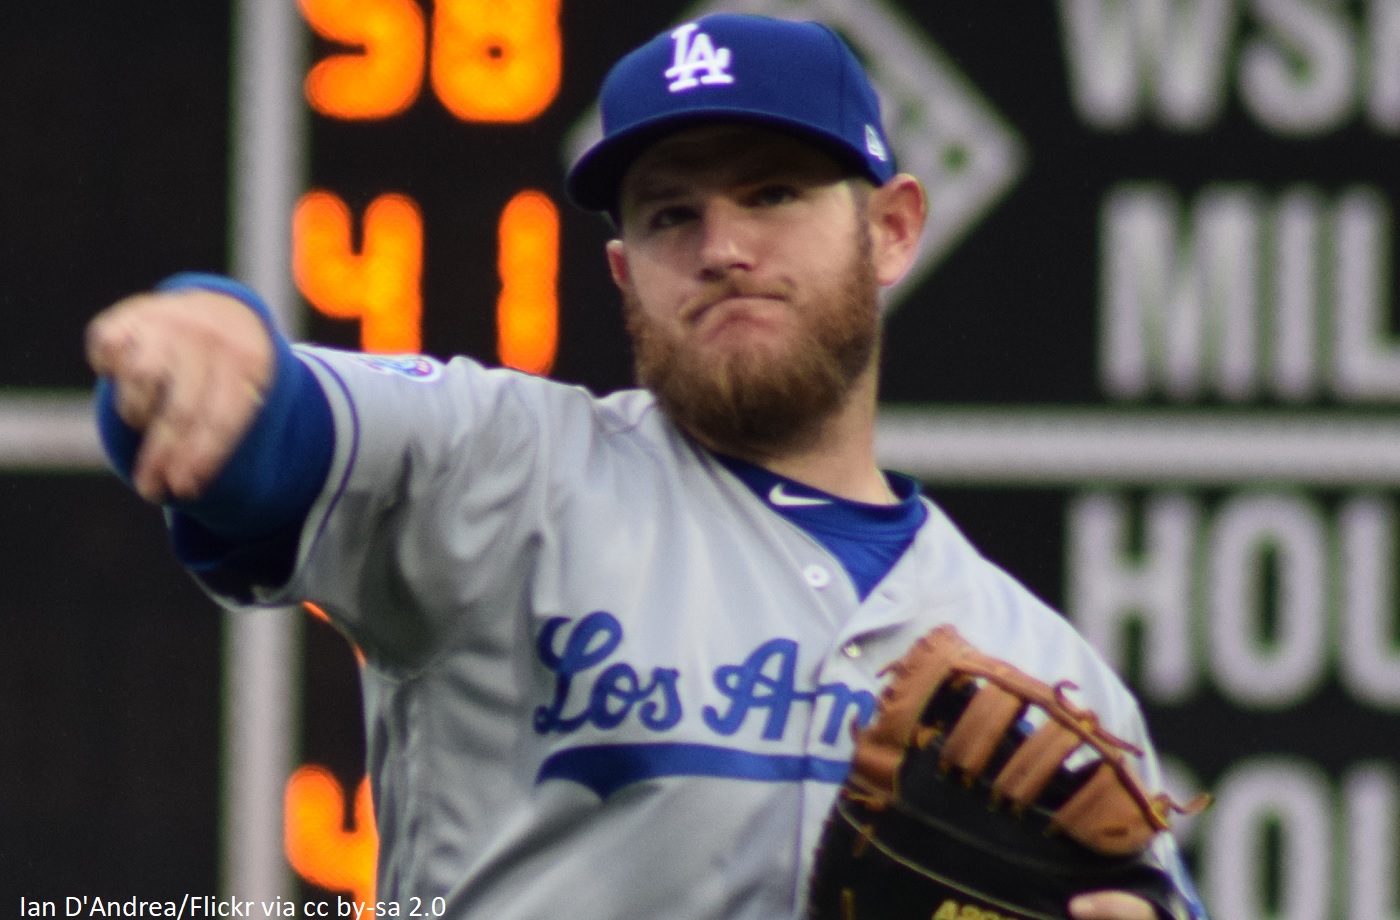 Max Muncy hit in the face by ball during batting practice